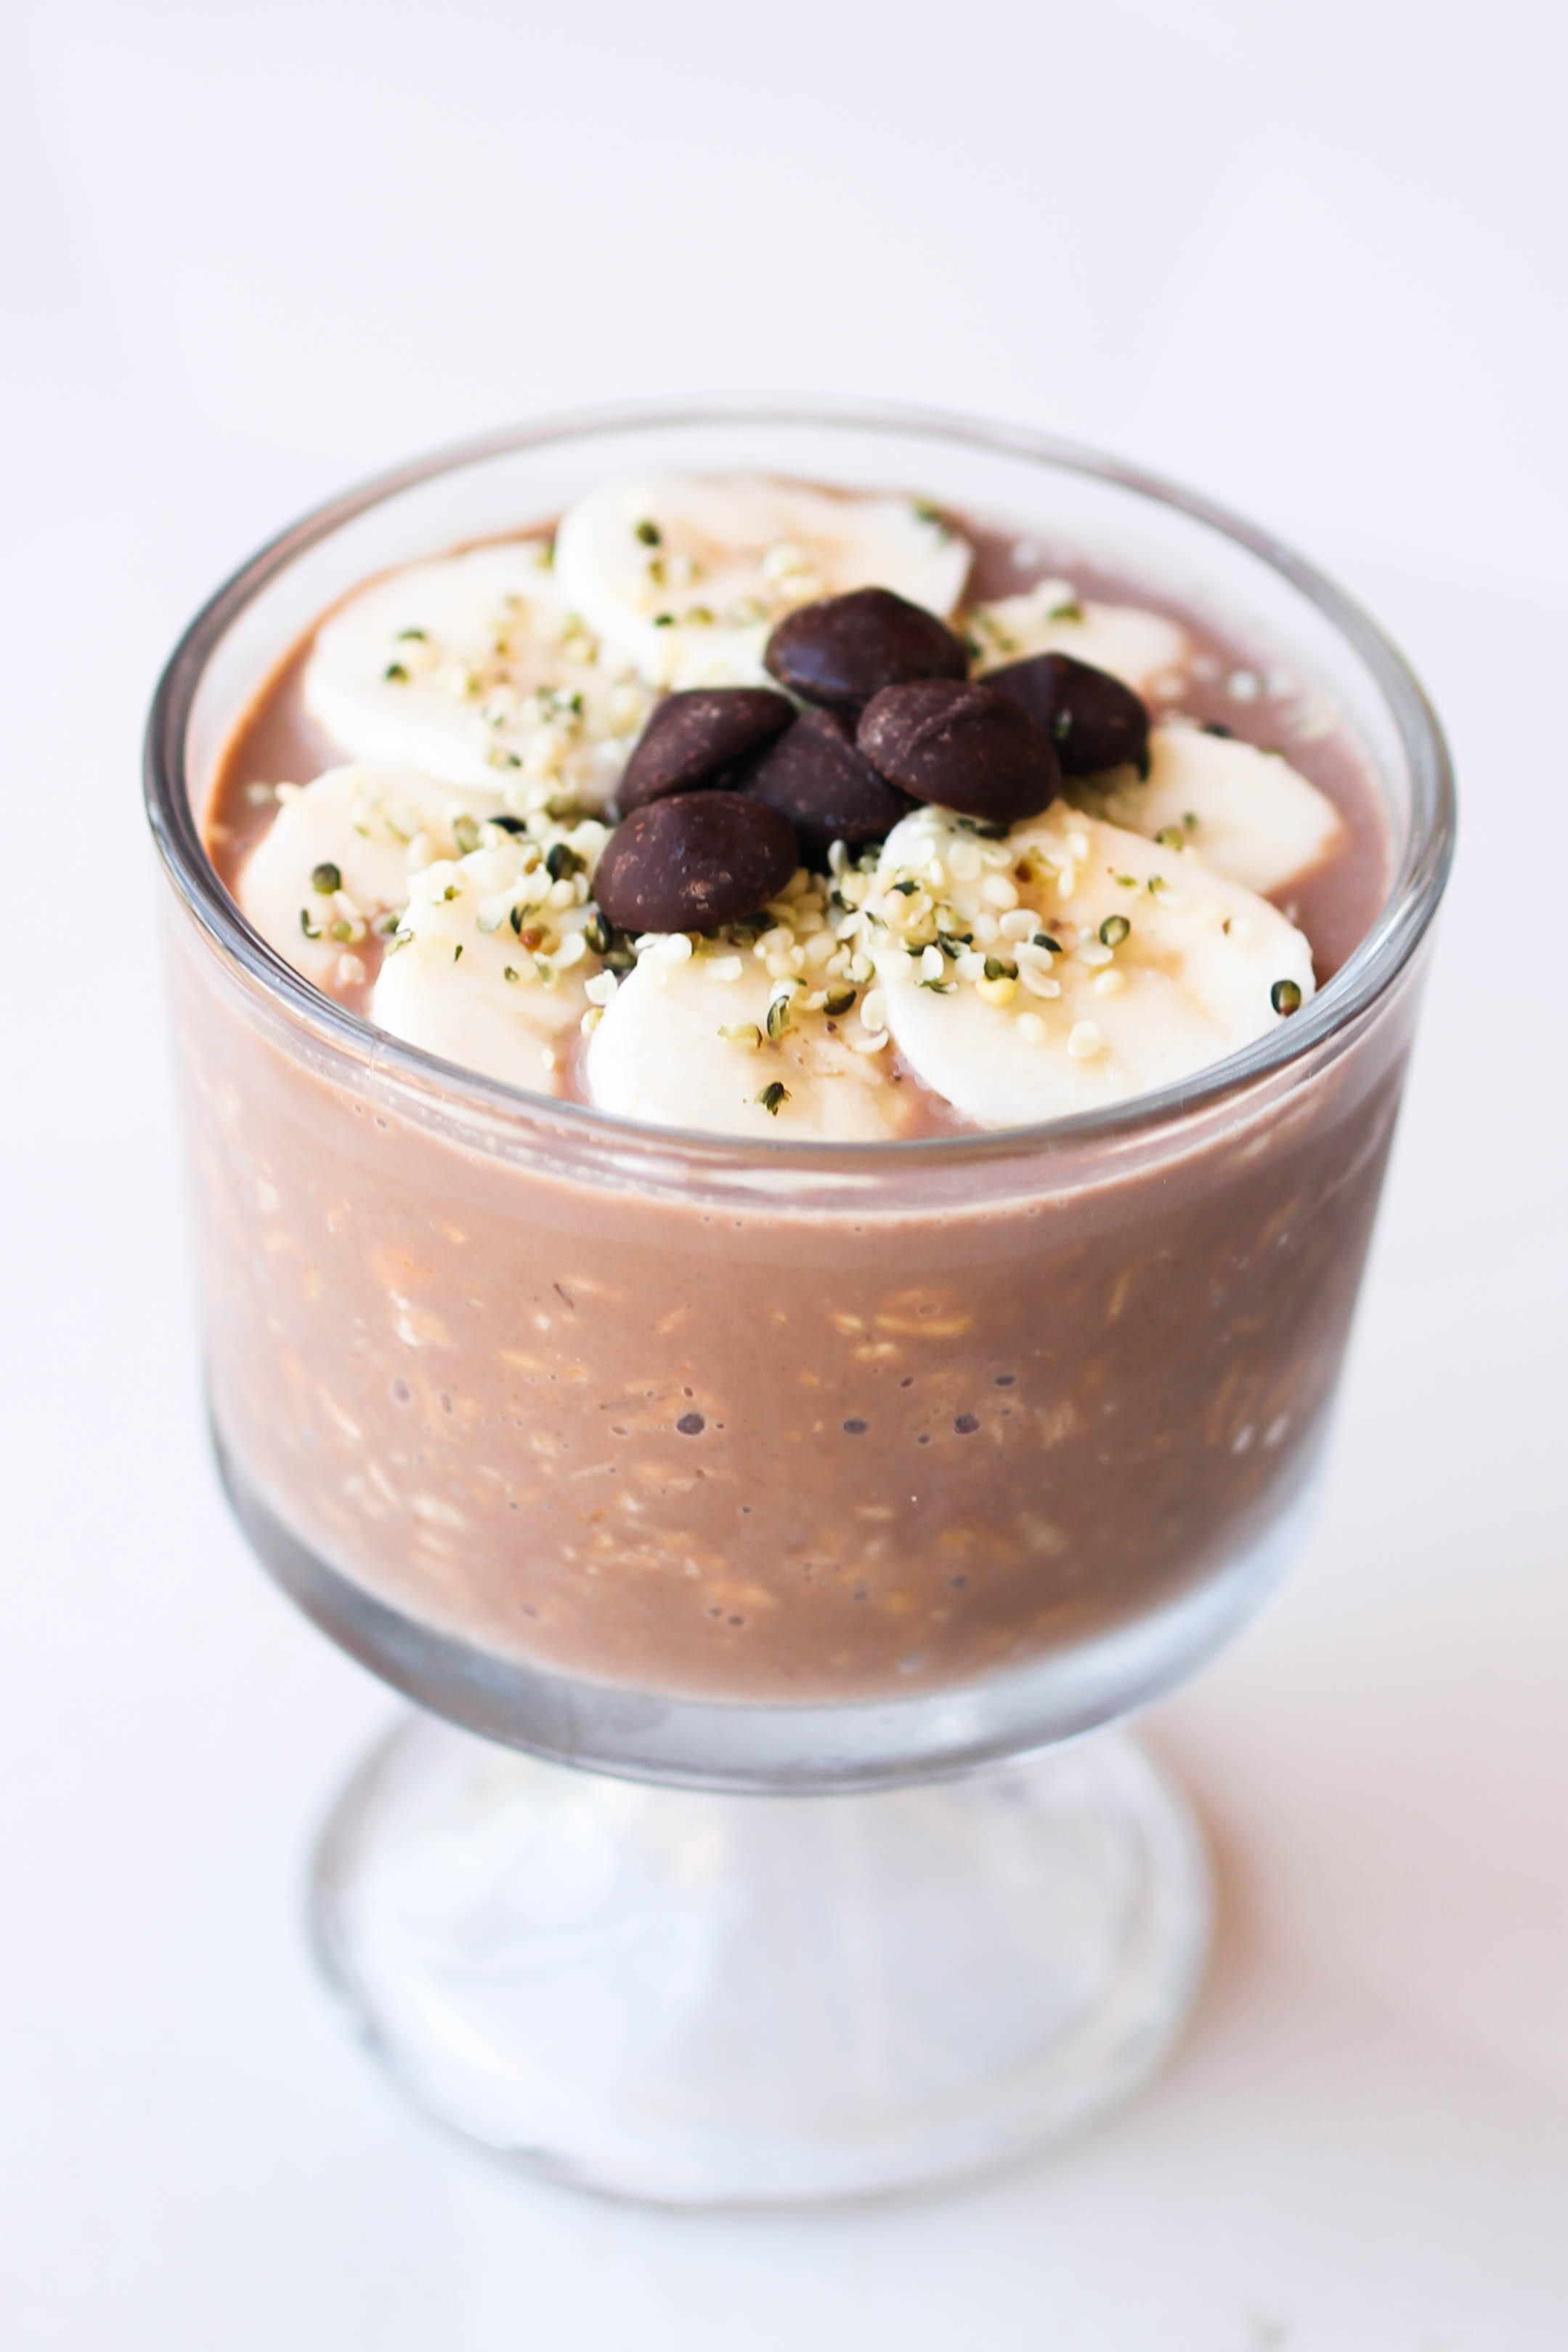 Mocha Overnight Oats are perfect grab n' go breakfast. The combination of coffee and chocolate together makes it a decadent, wholesome breakfast that everyone will love.